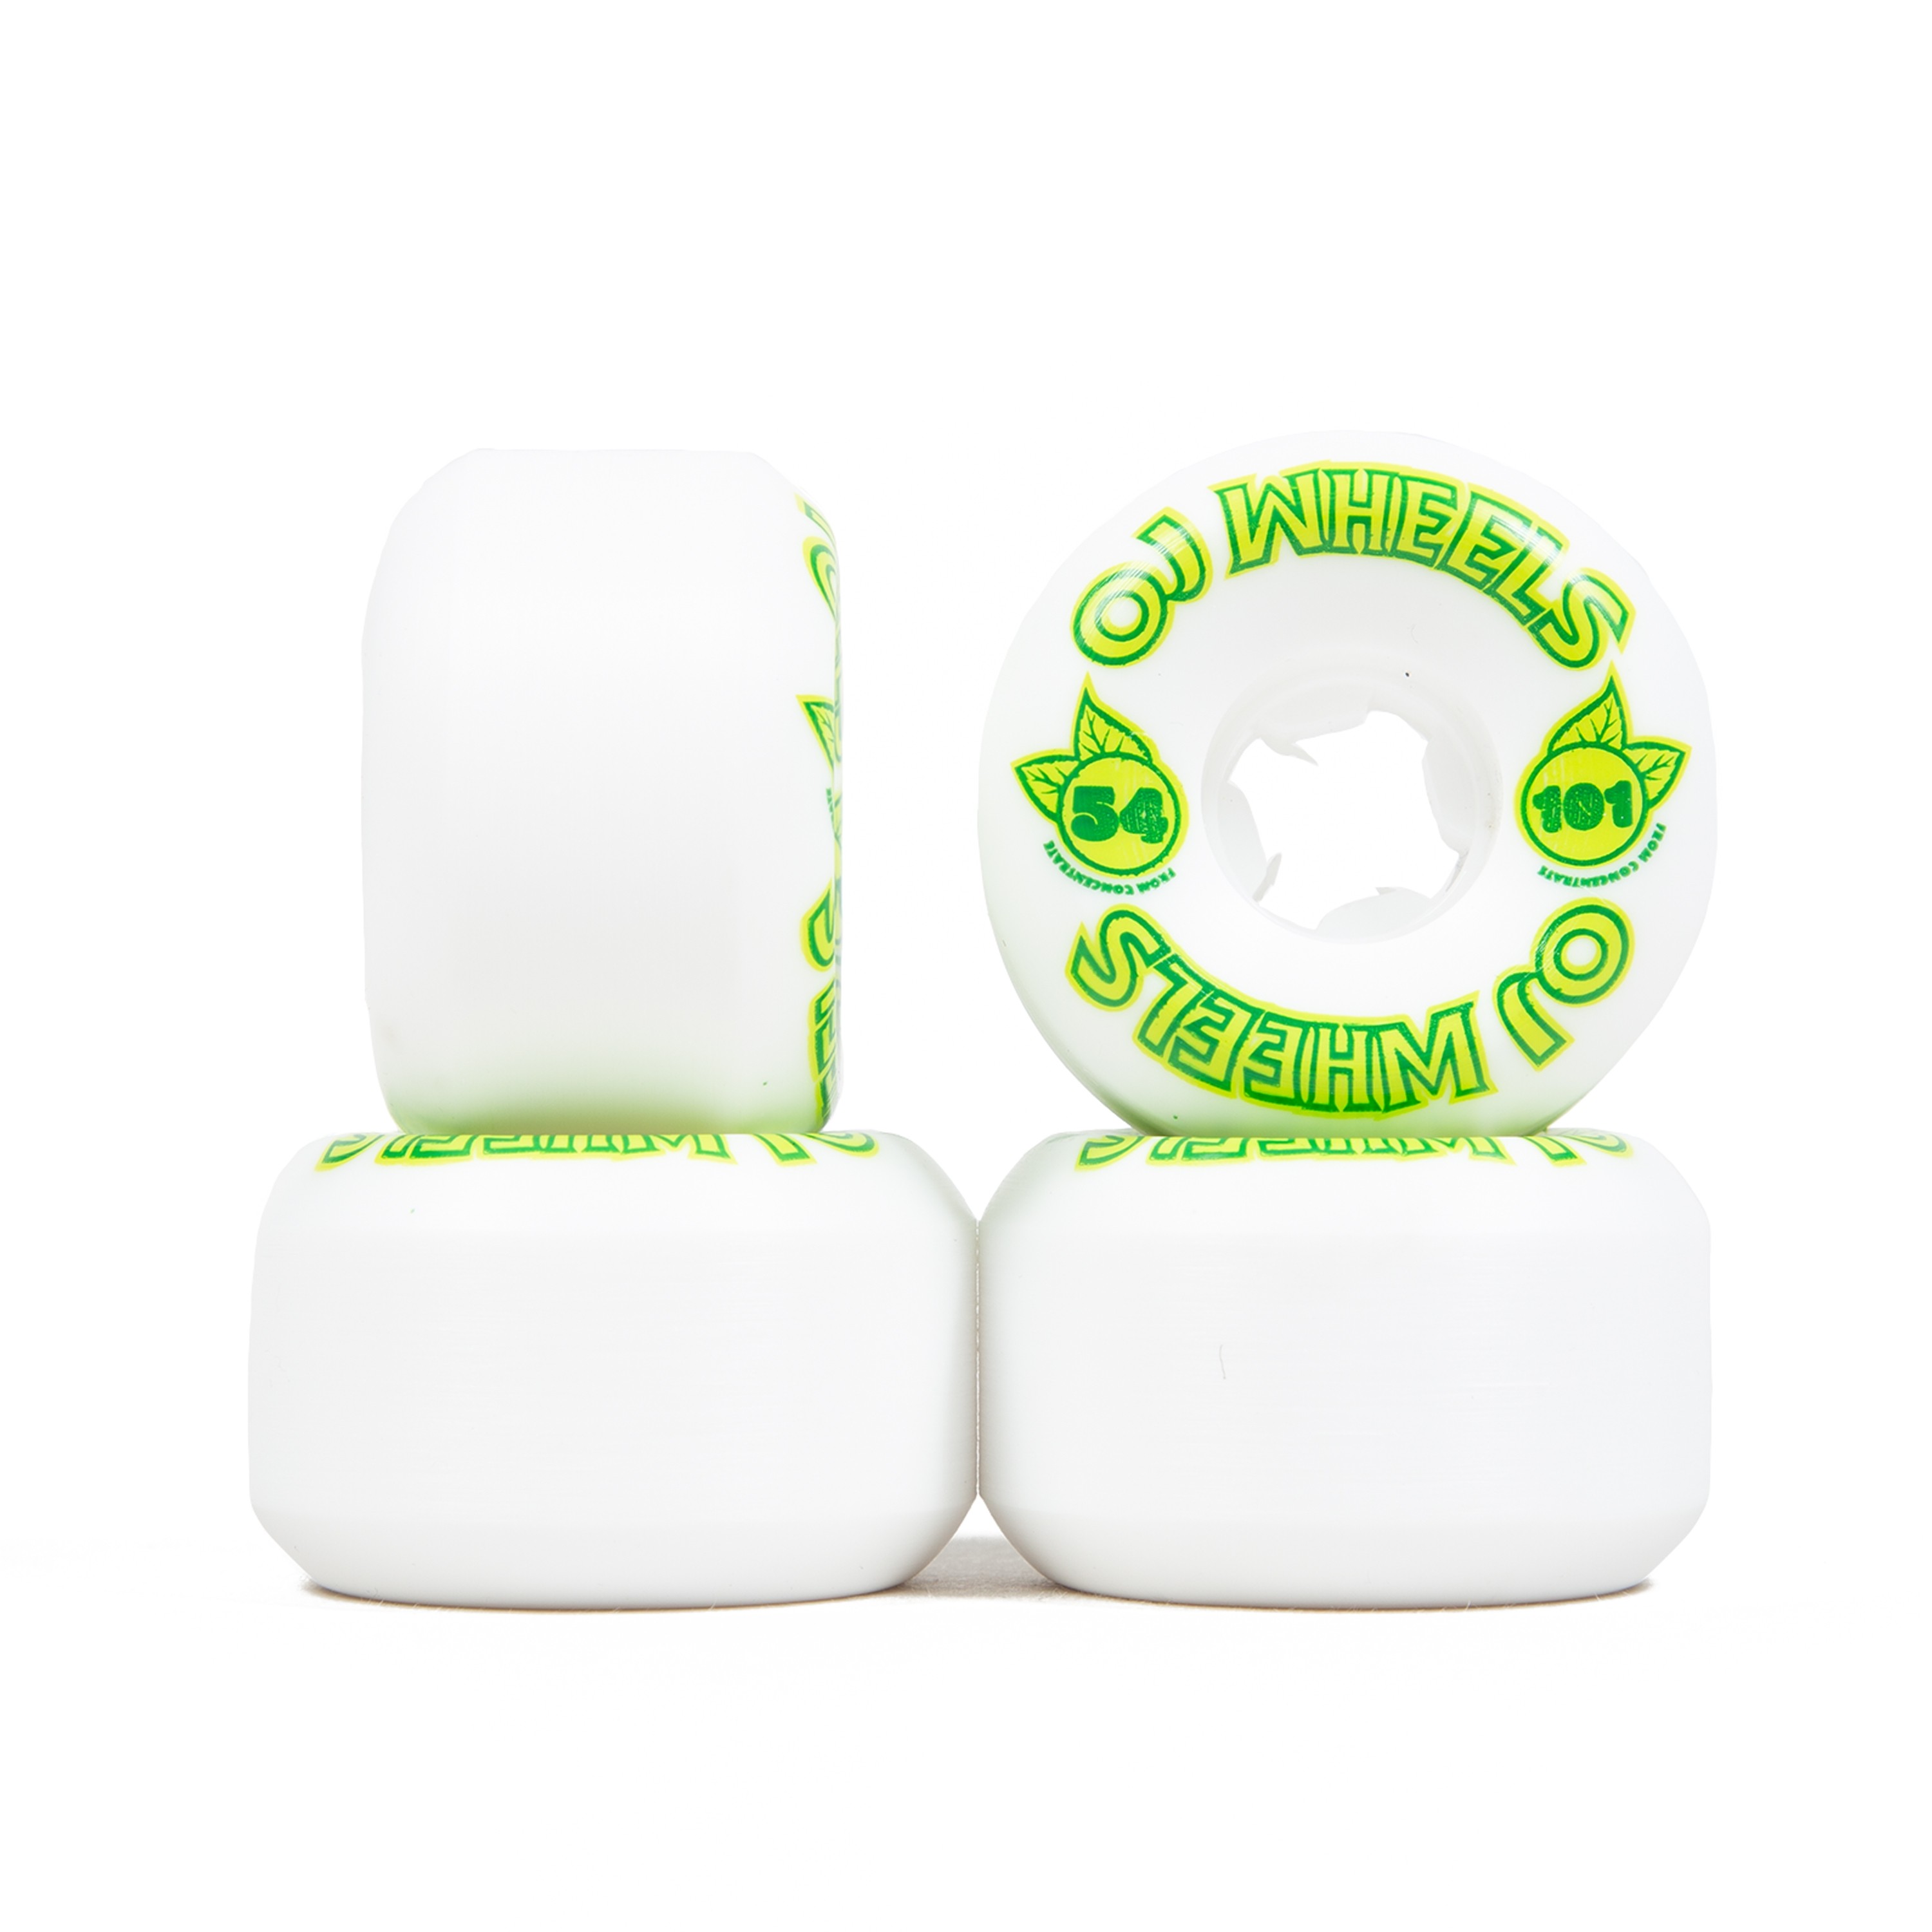 OJ III Skateboard Wheels 54mm from Concentrate Hardline 101A White